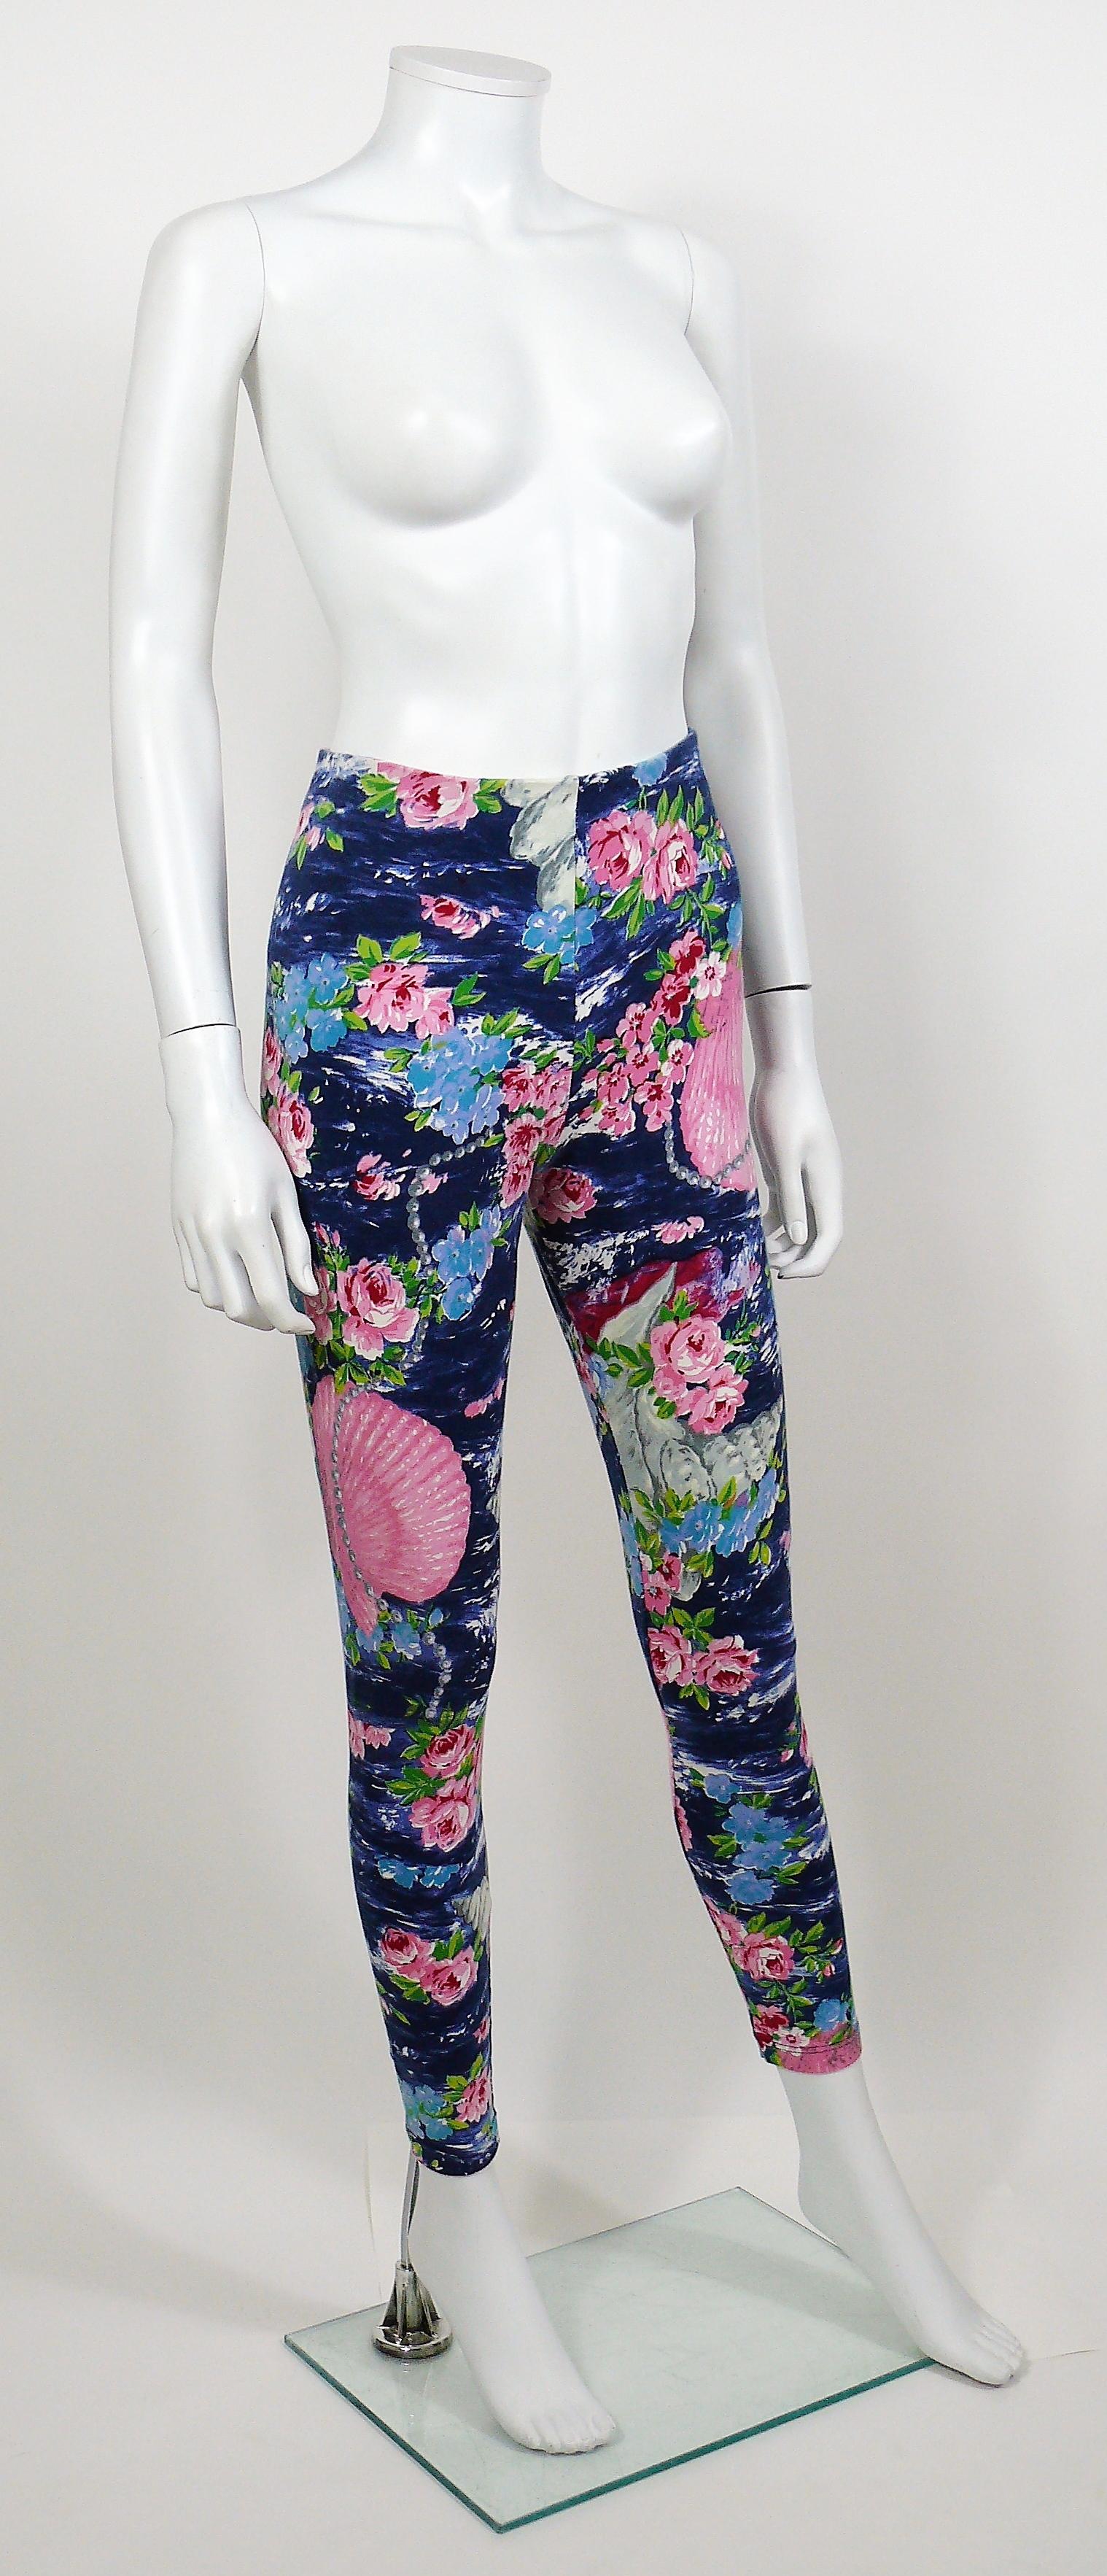 KENZO JUNGLE vintage leggings featuring an opulent floral, shell and pearl print.

Has stretch.
Elasticated waistline.

Label reads JUNGLE KENZO.
Made in Italy.

Missing size tag.
Please refer to measurements.

Composition tag reads : 90% Cotton /